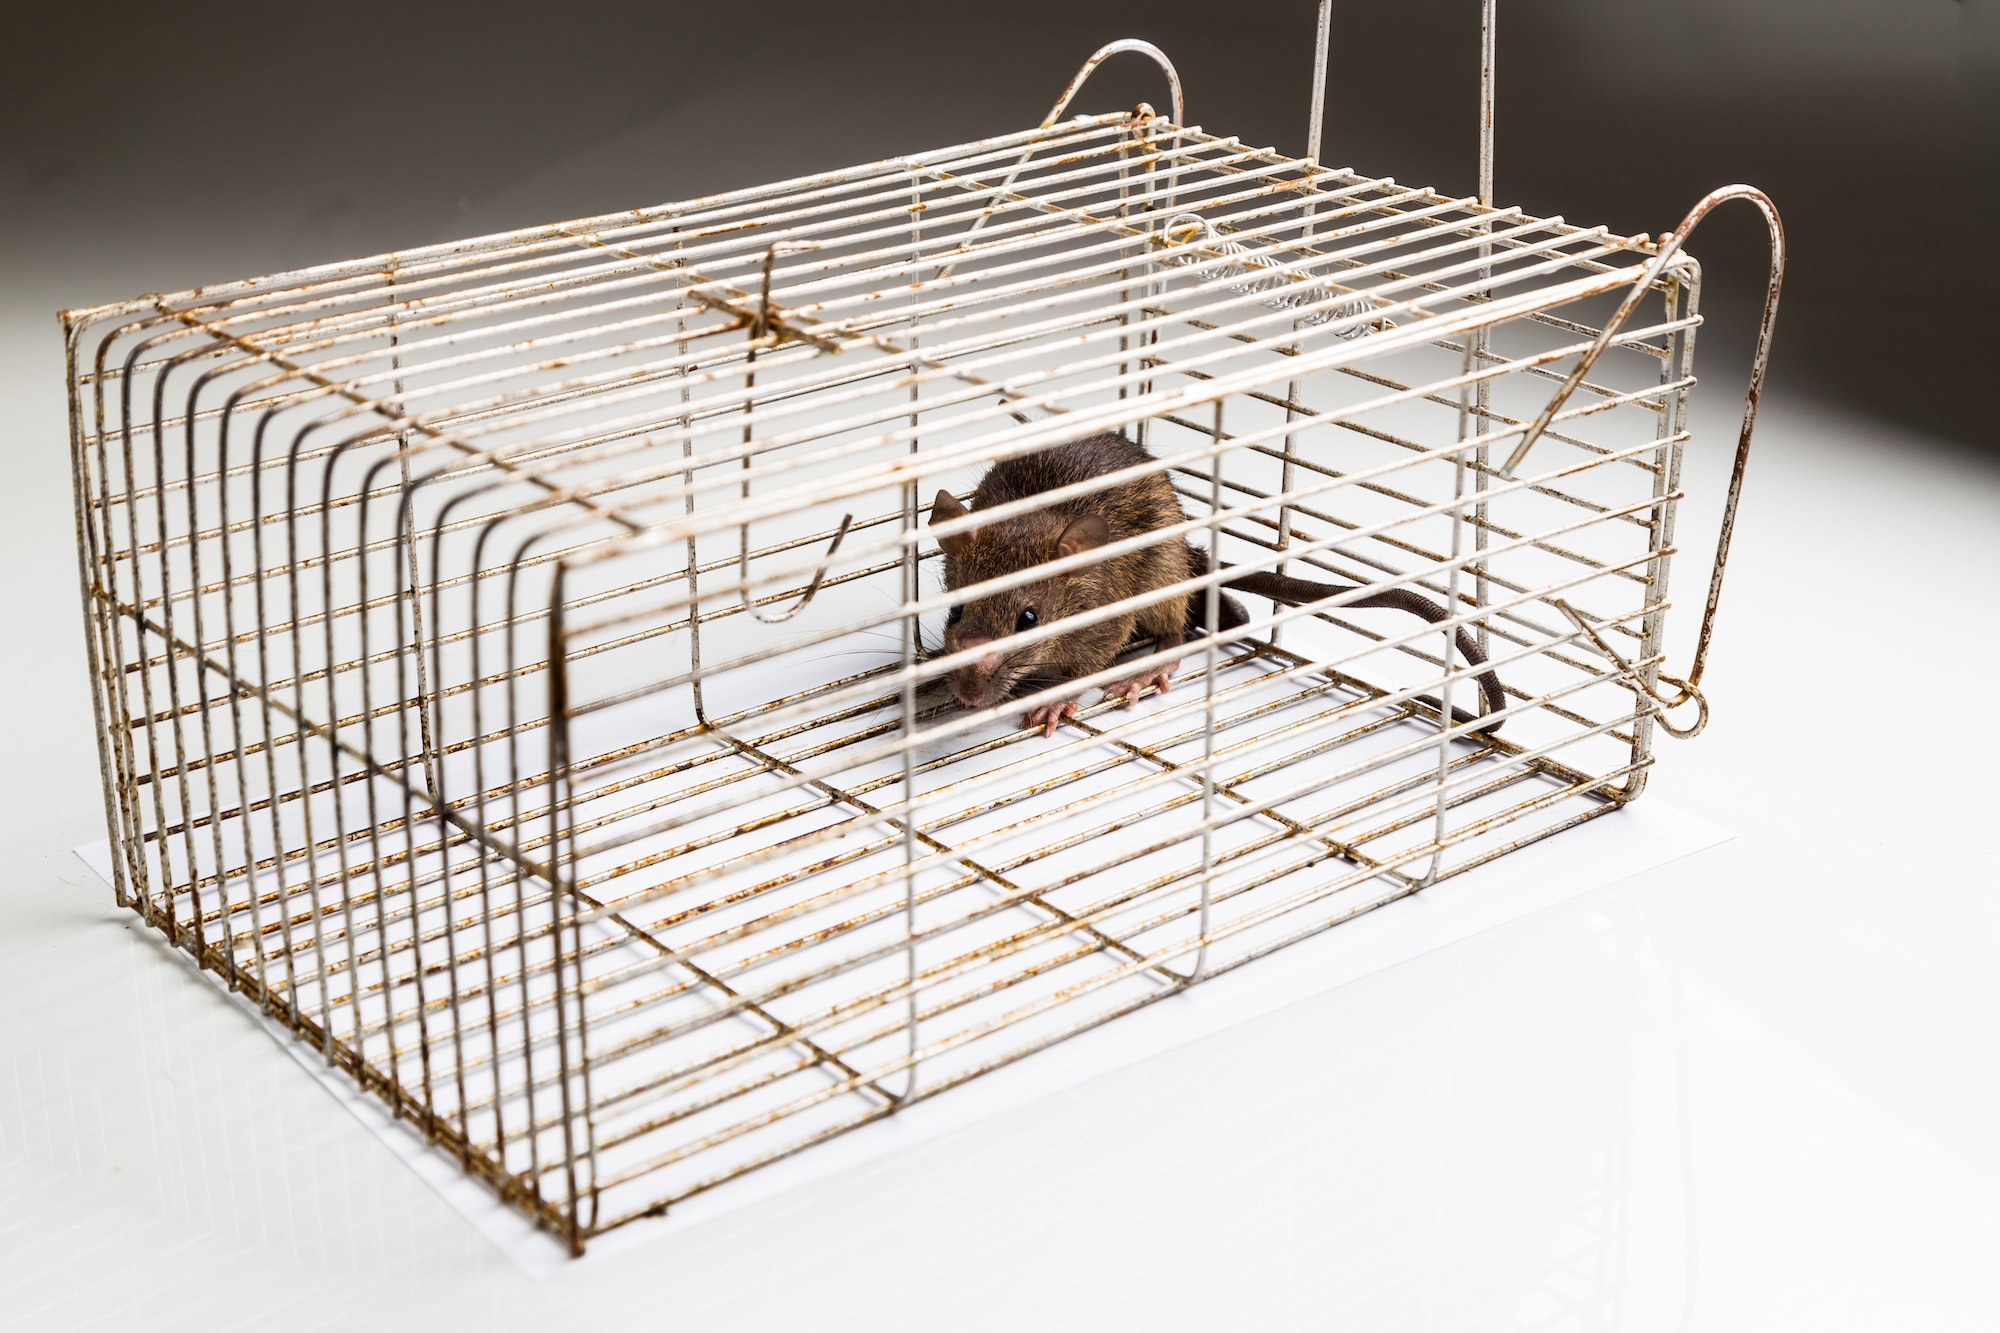 Metal cage with a trapped rat